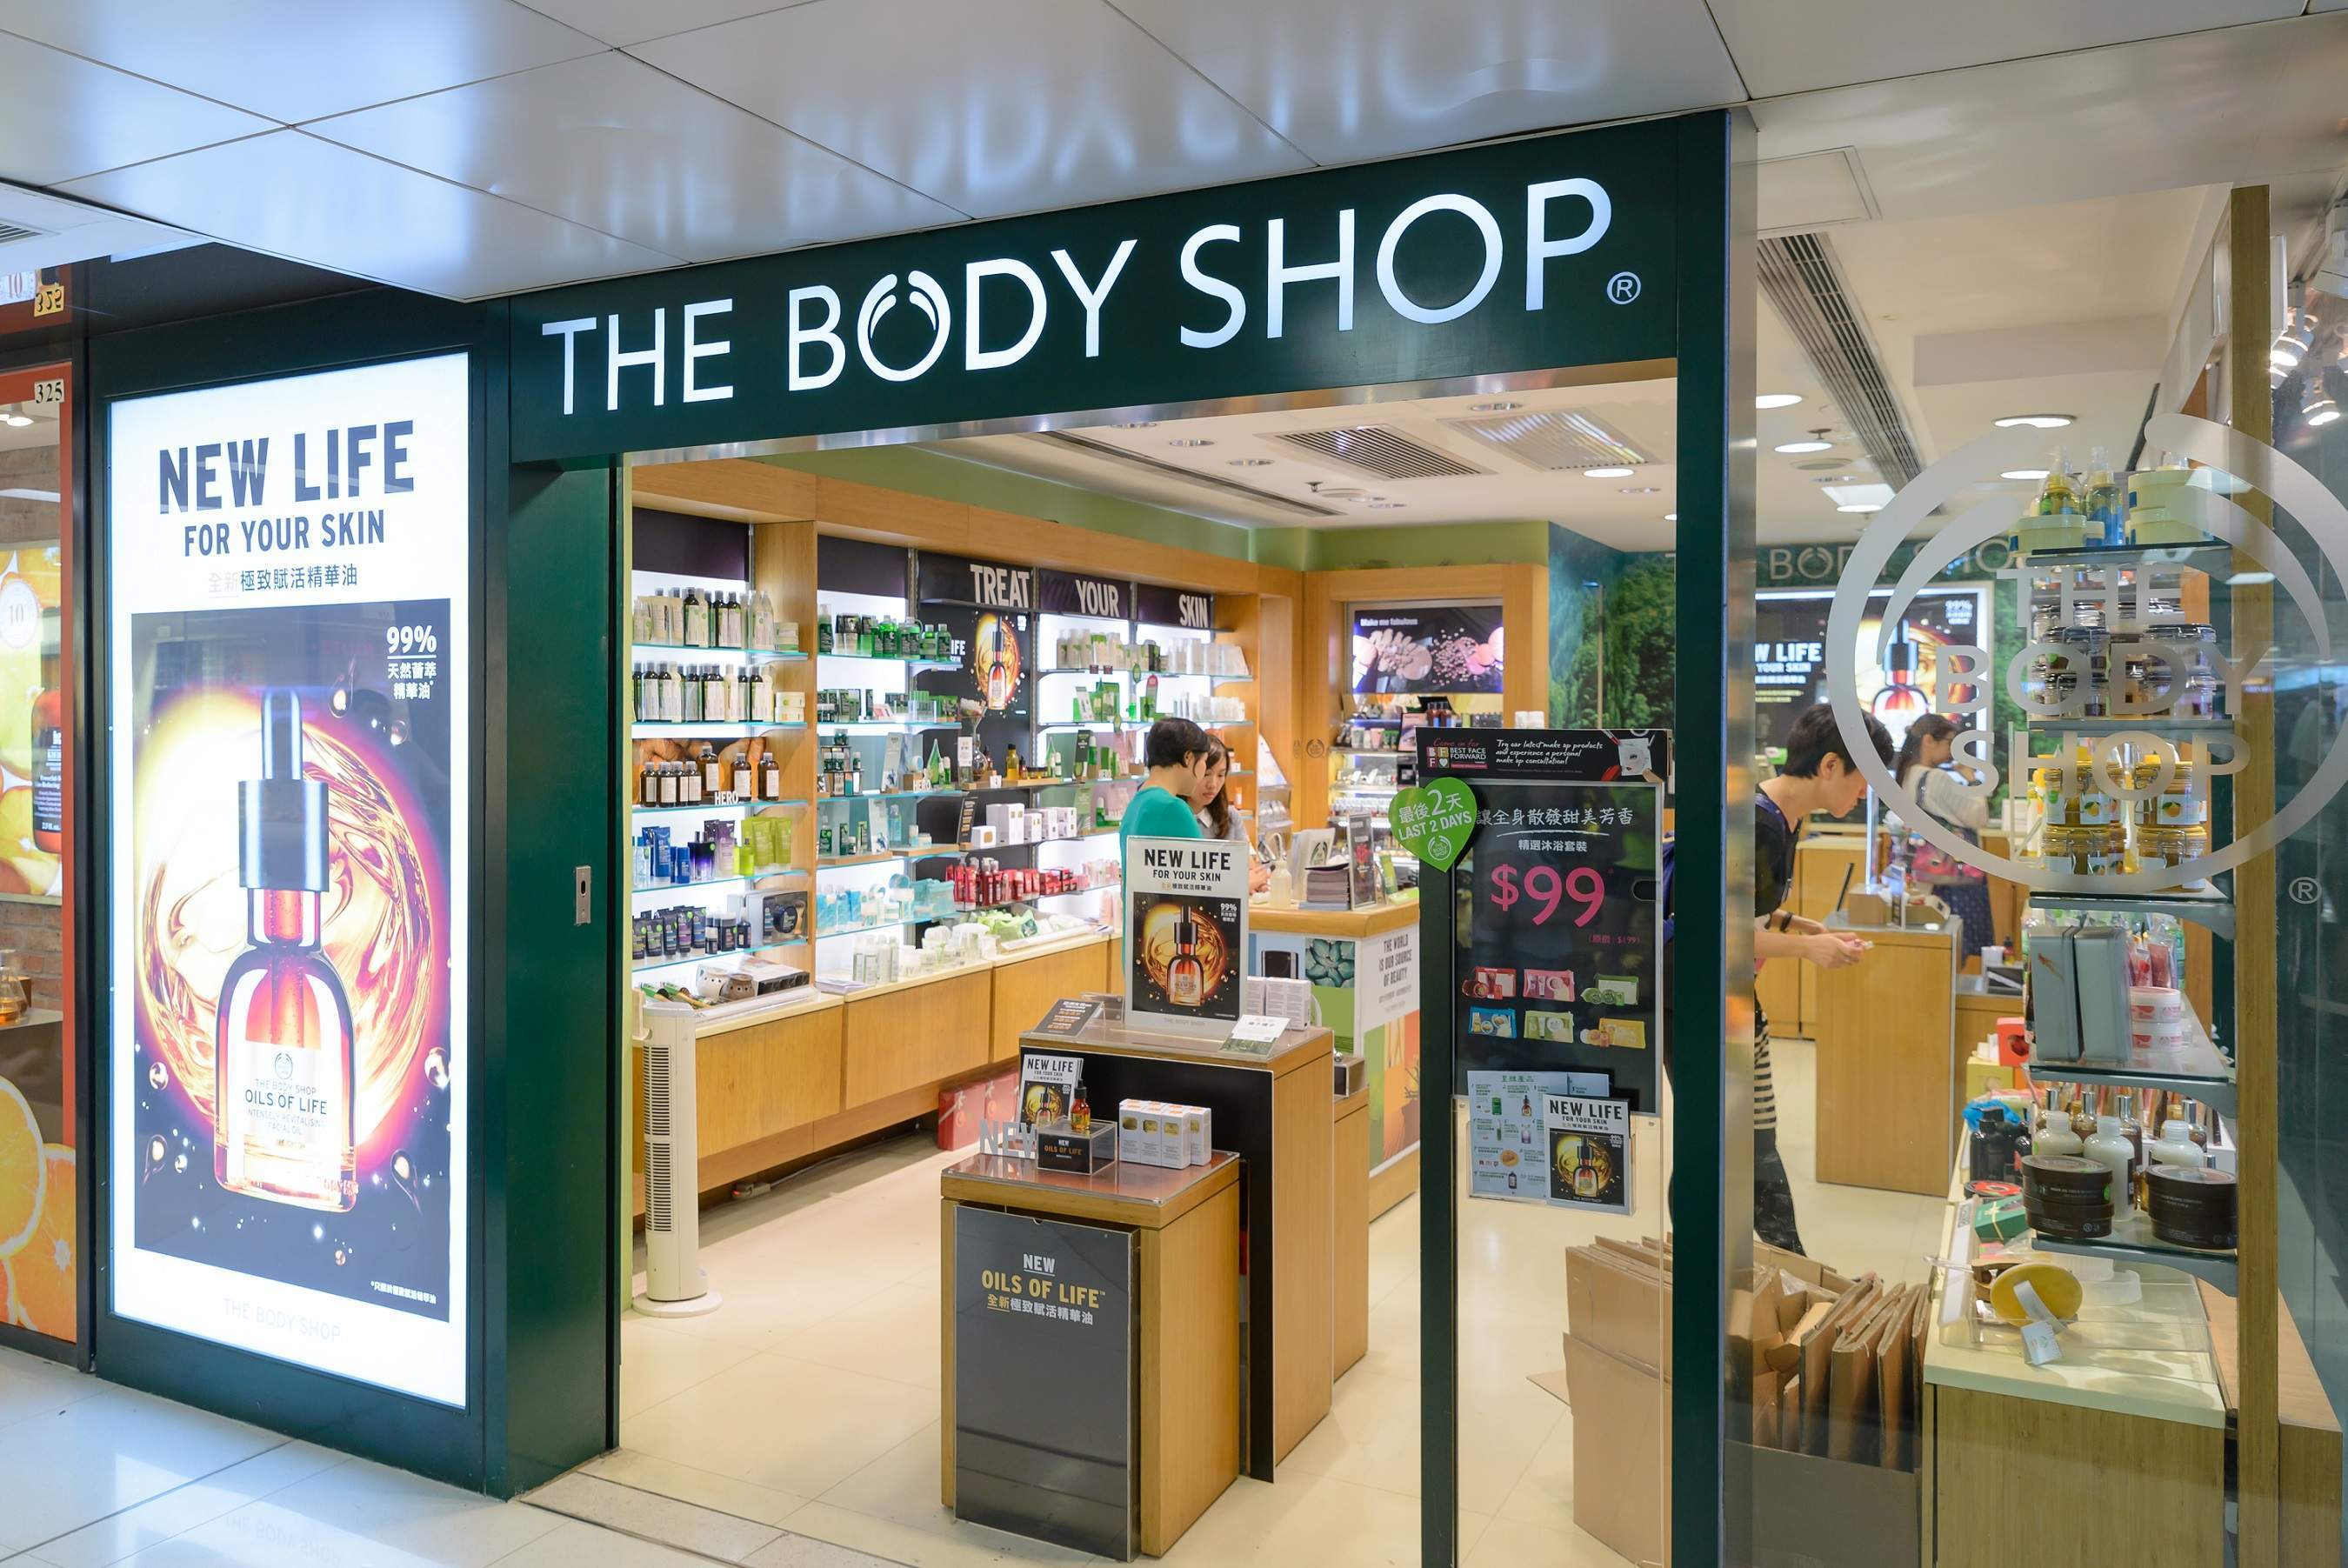 The Body Shop is up for sale: here’s what you need to know